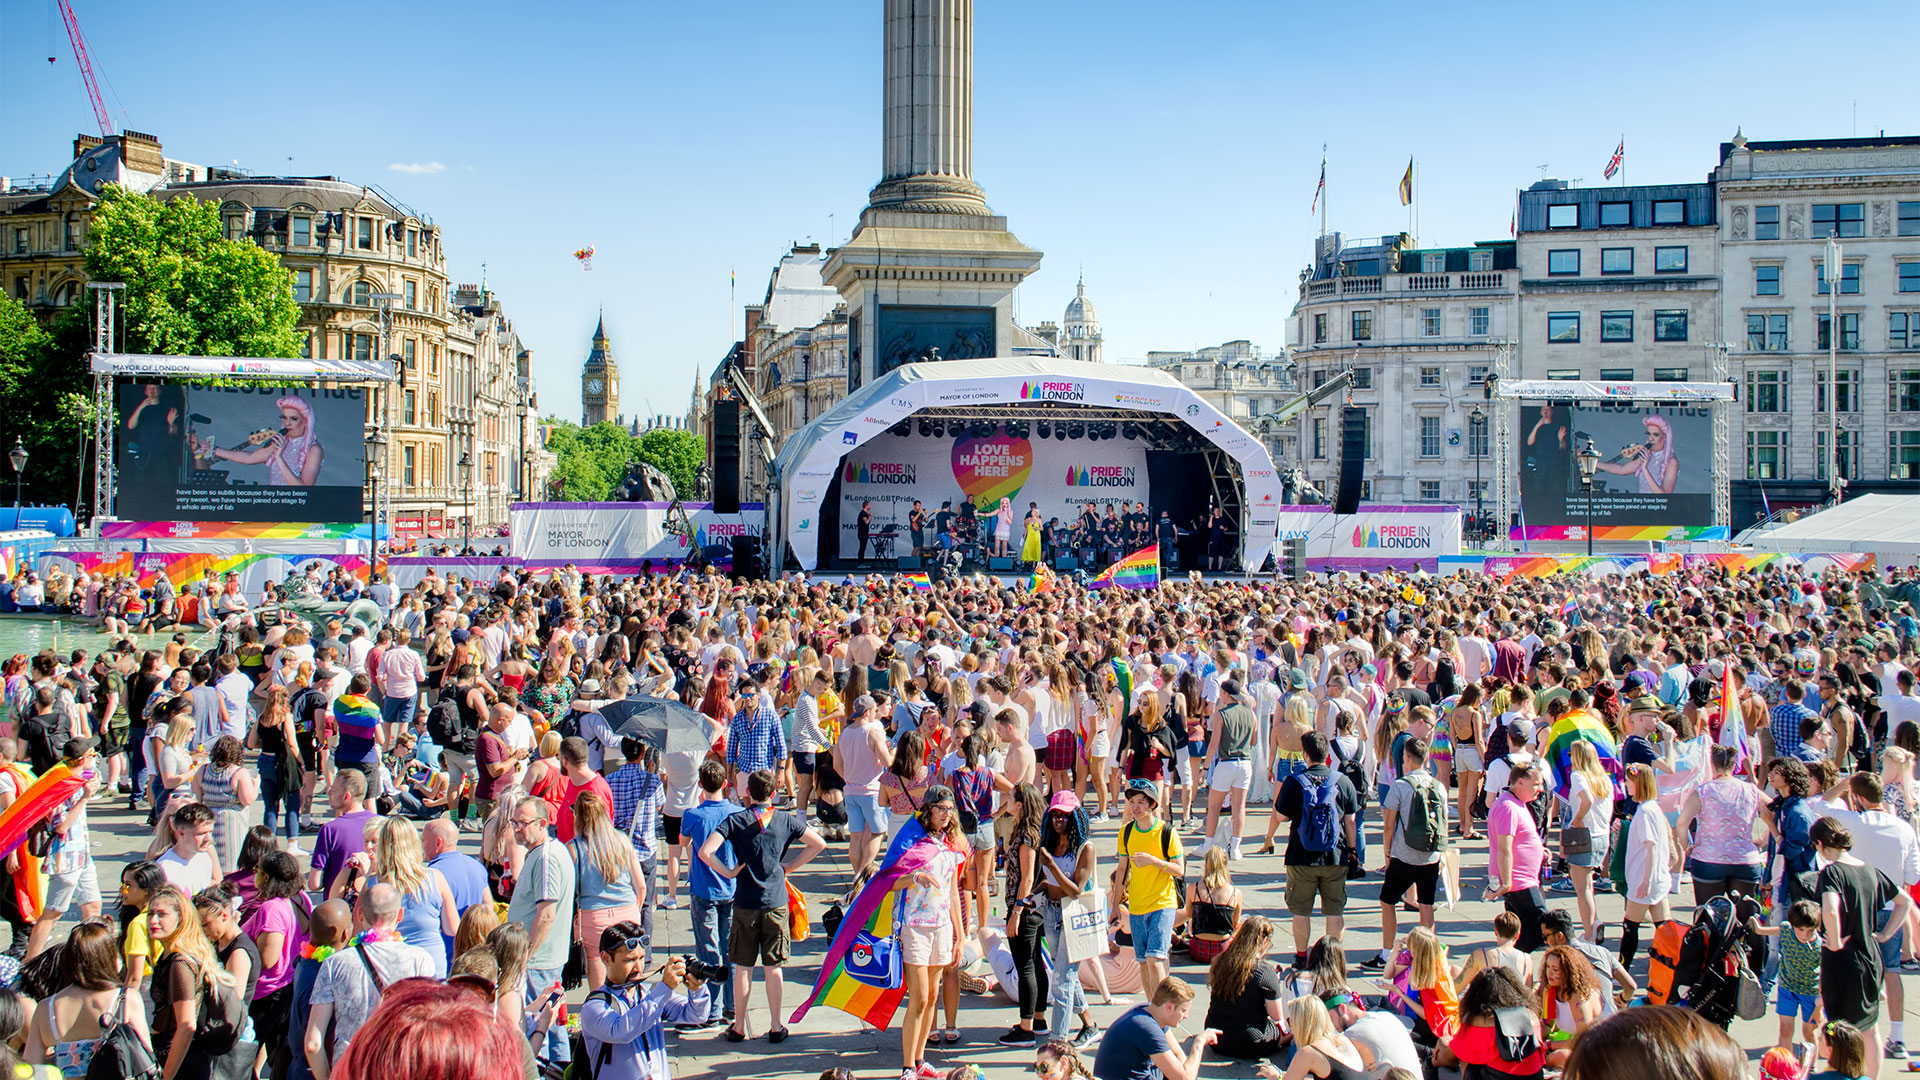 Crowds gather in front of the Trafalgar Square stage during Pride in London 2017.